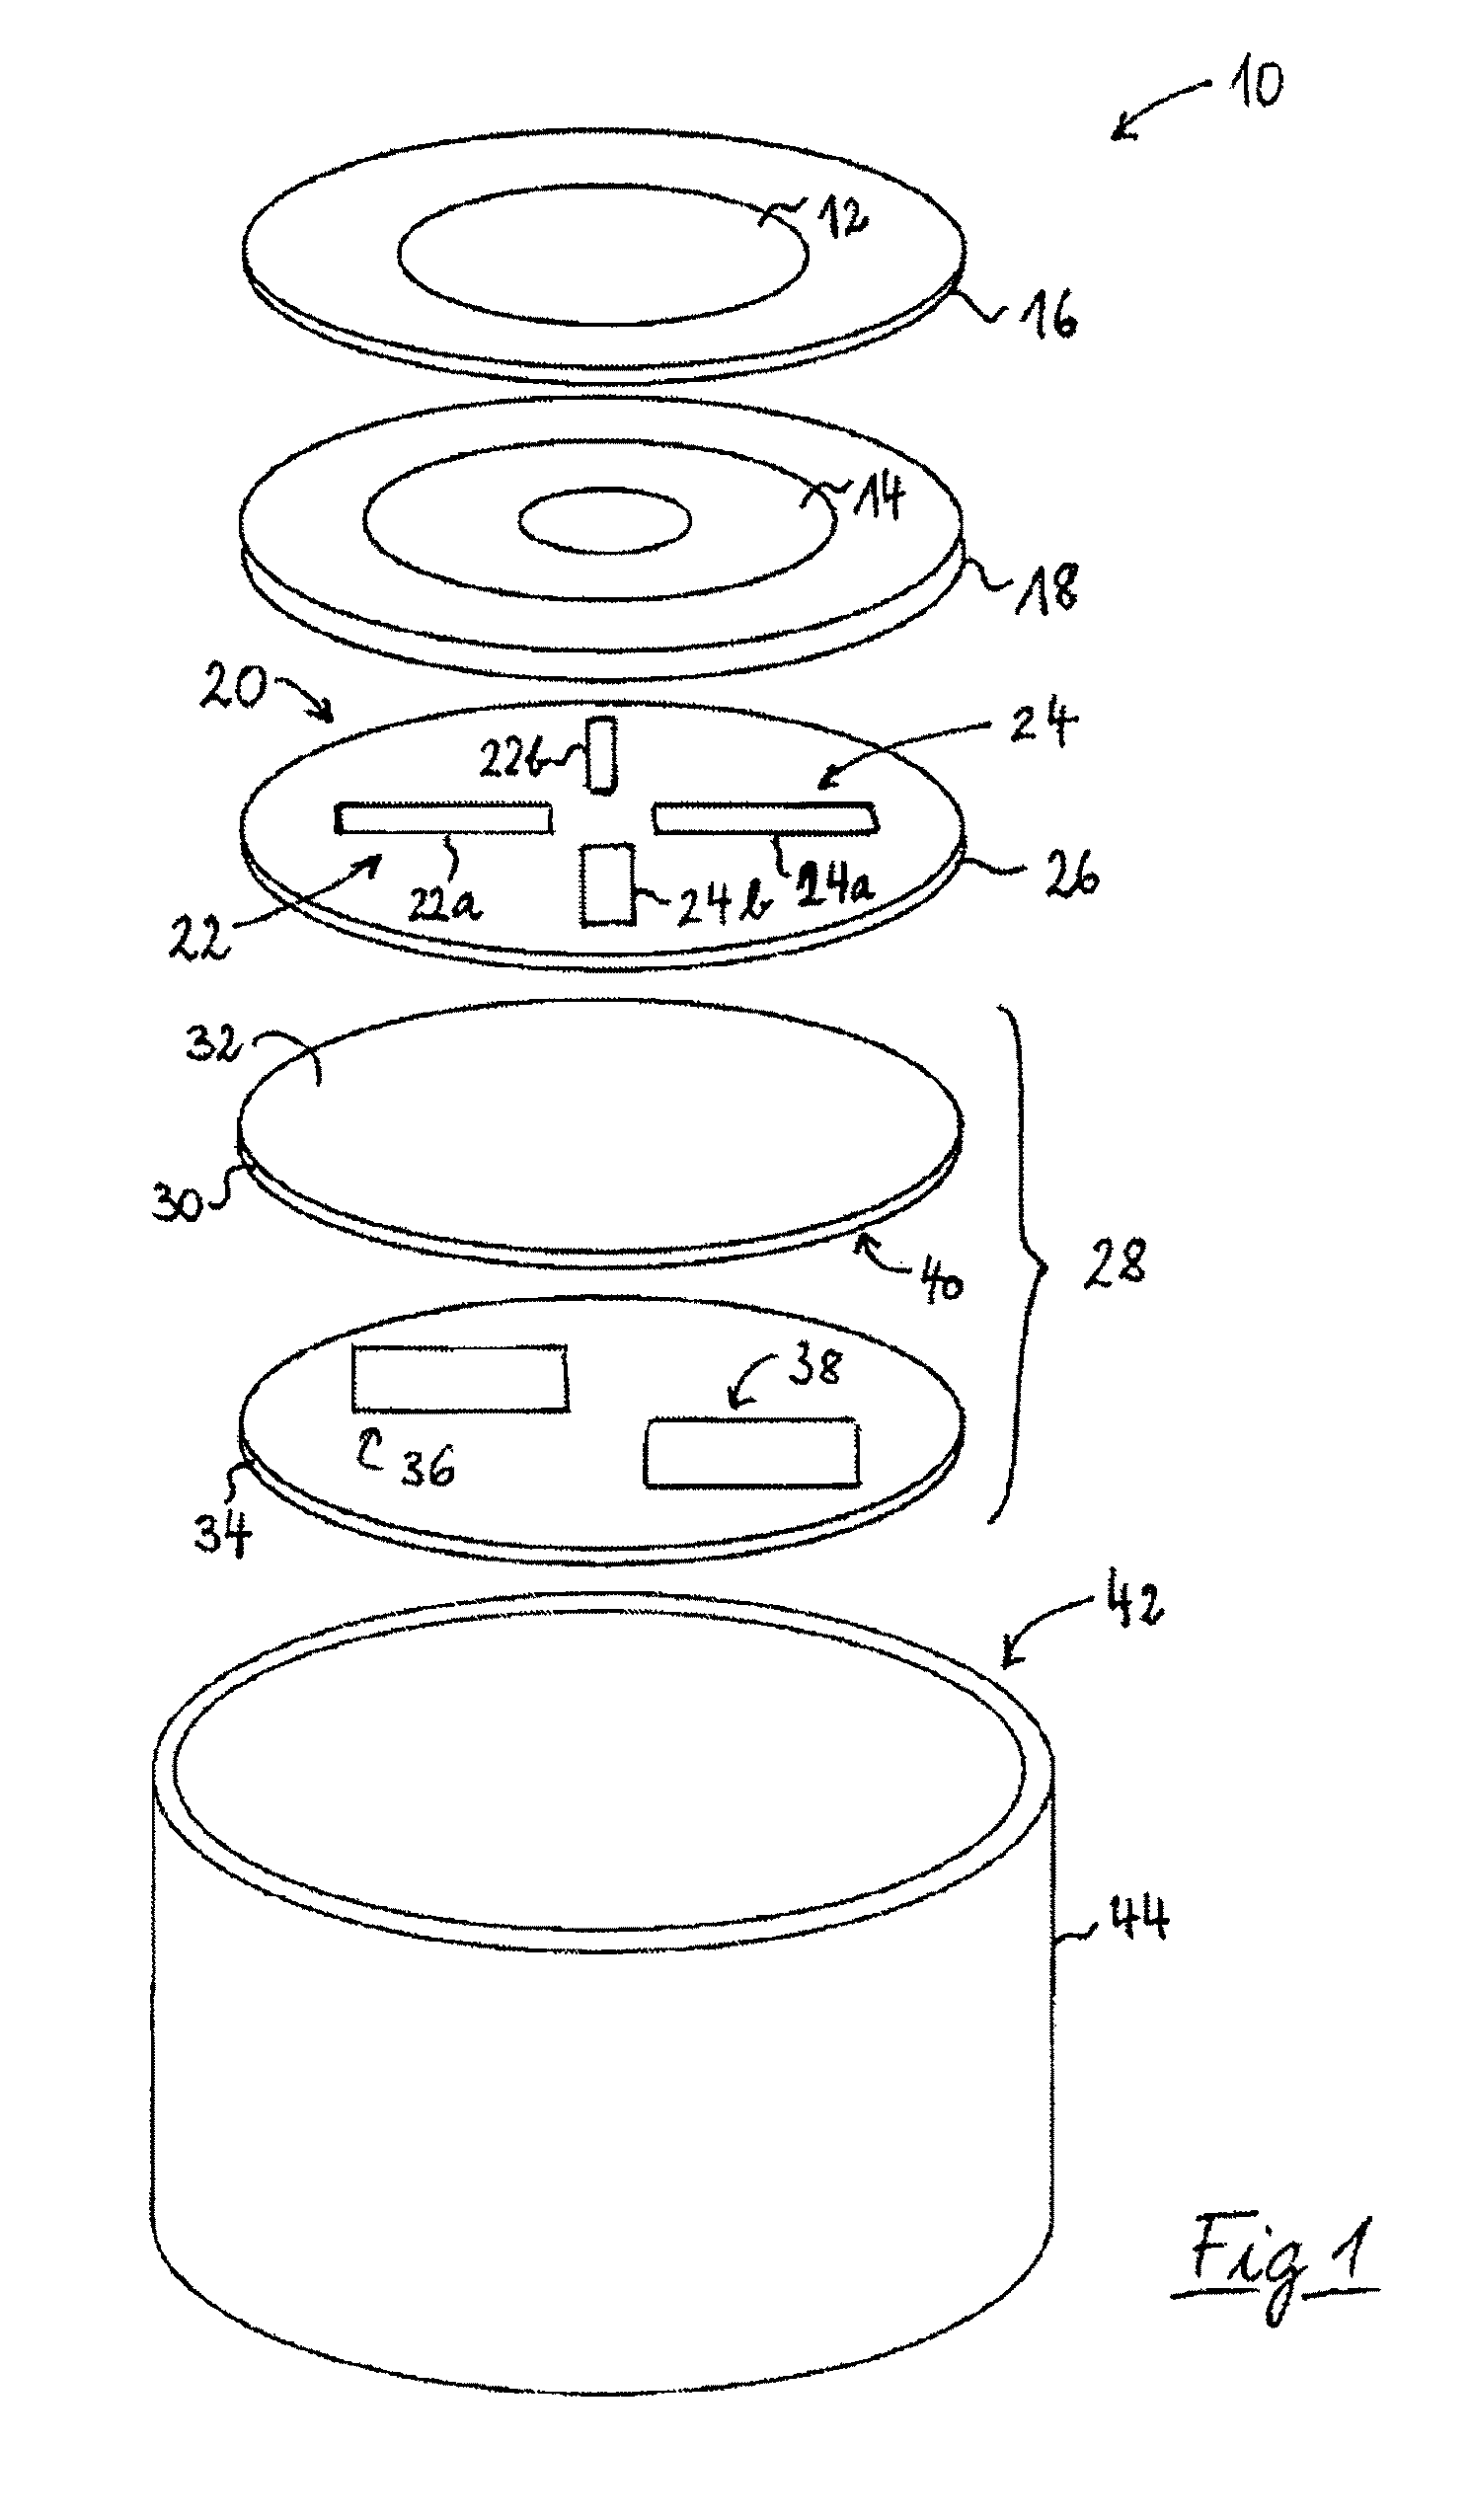 Multi-band antenna for satellite positioning system